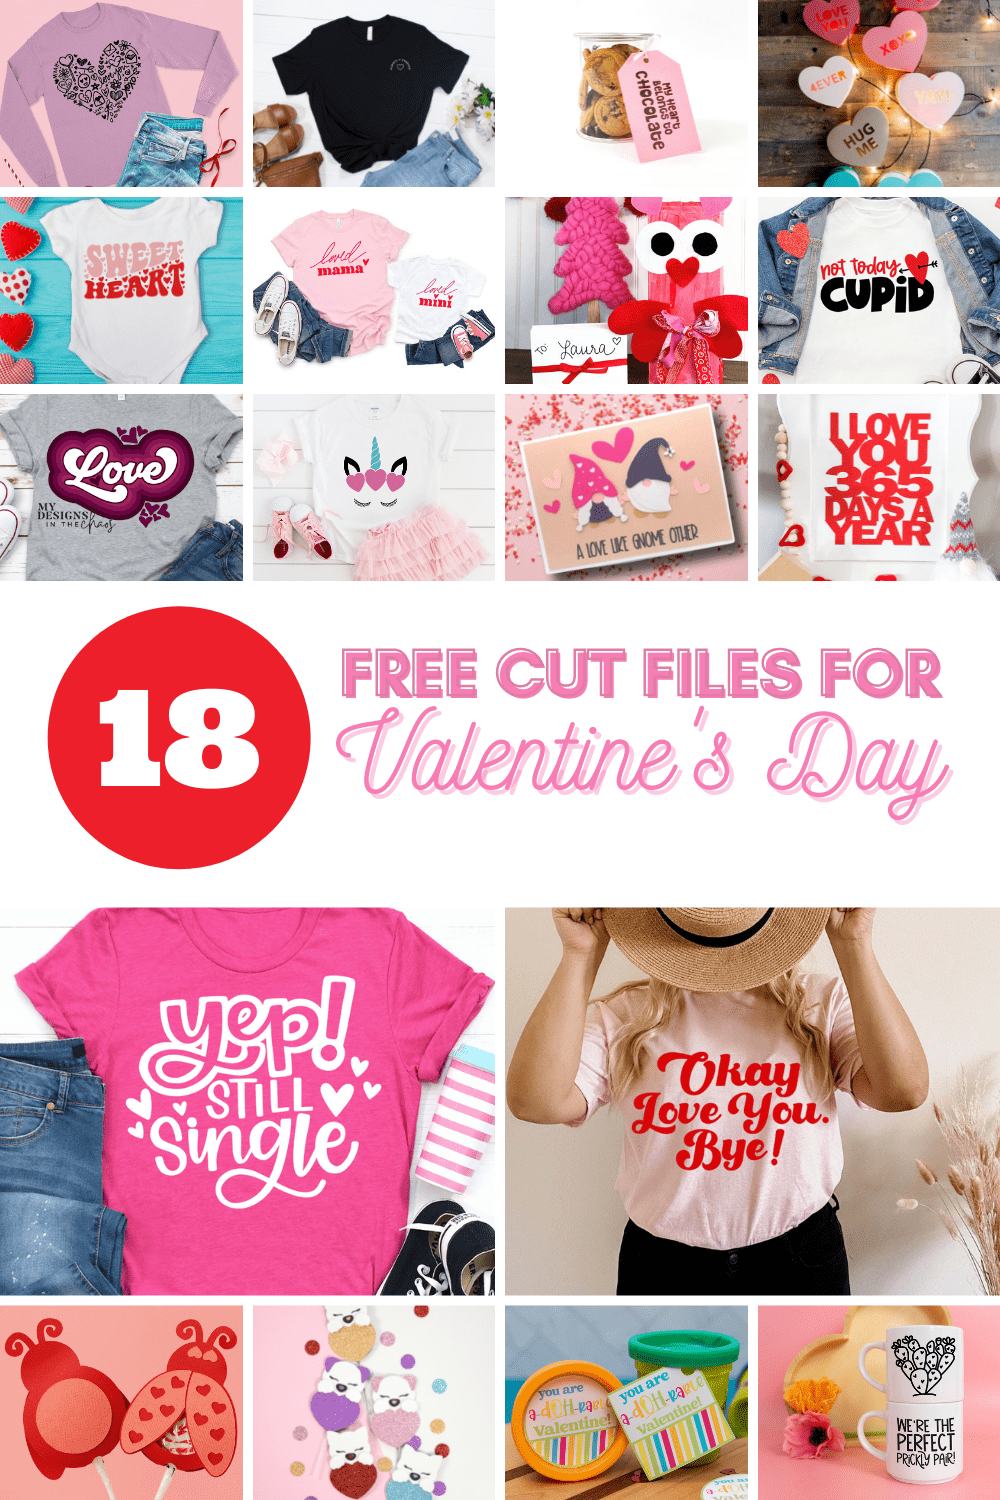 10 free cut files for Valentine's Day collage